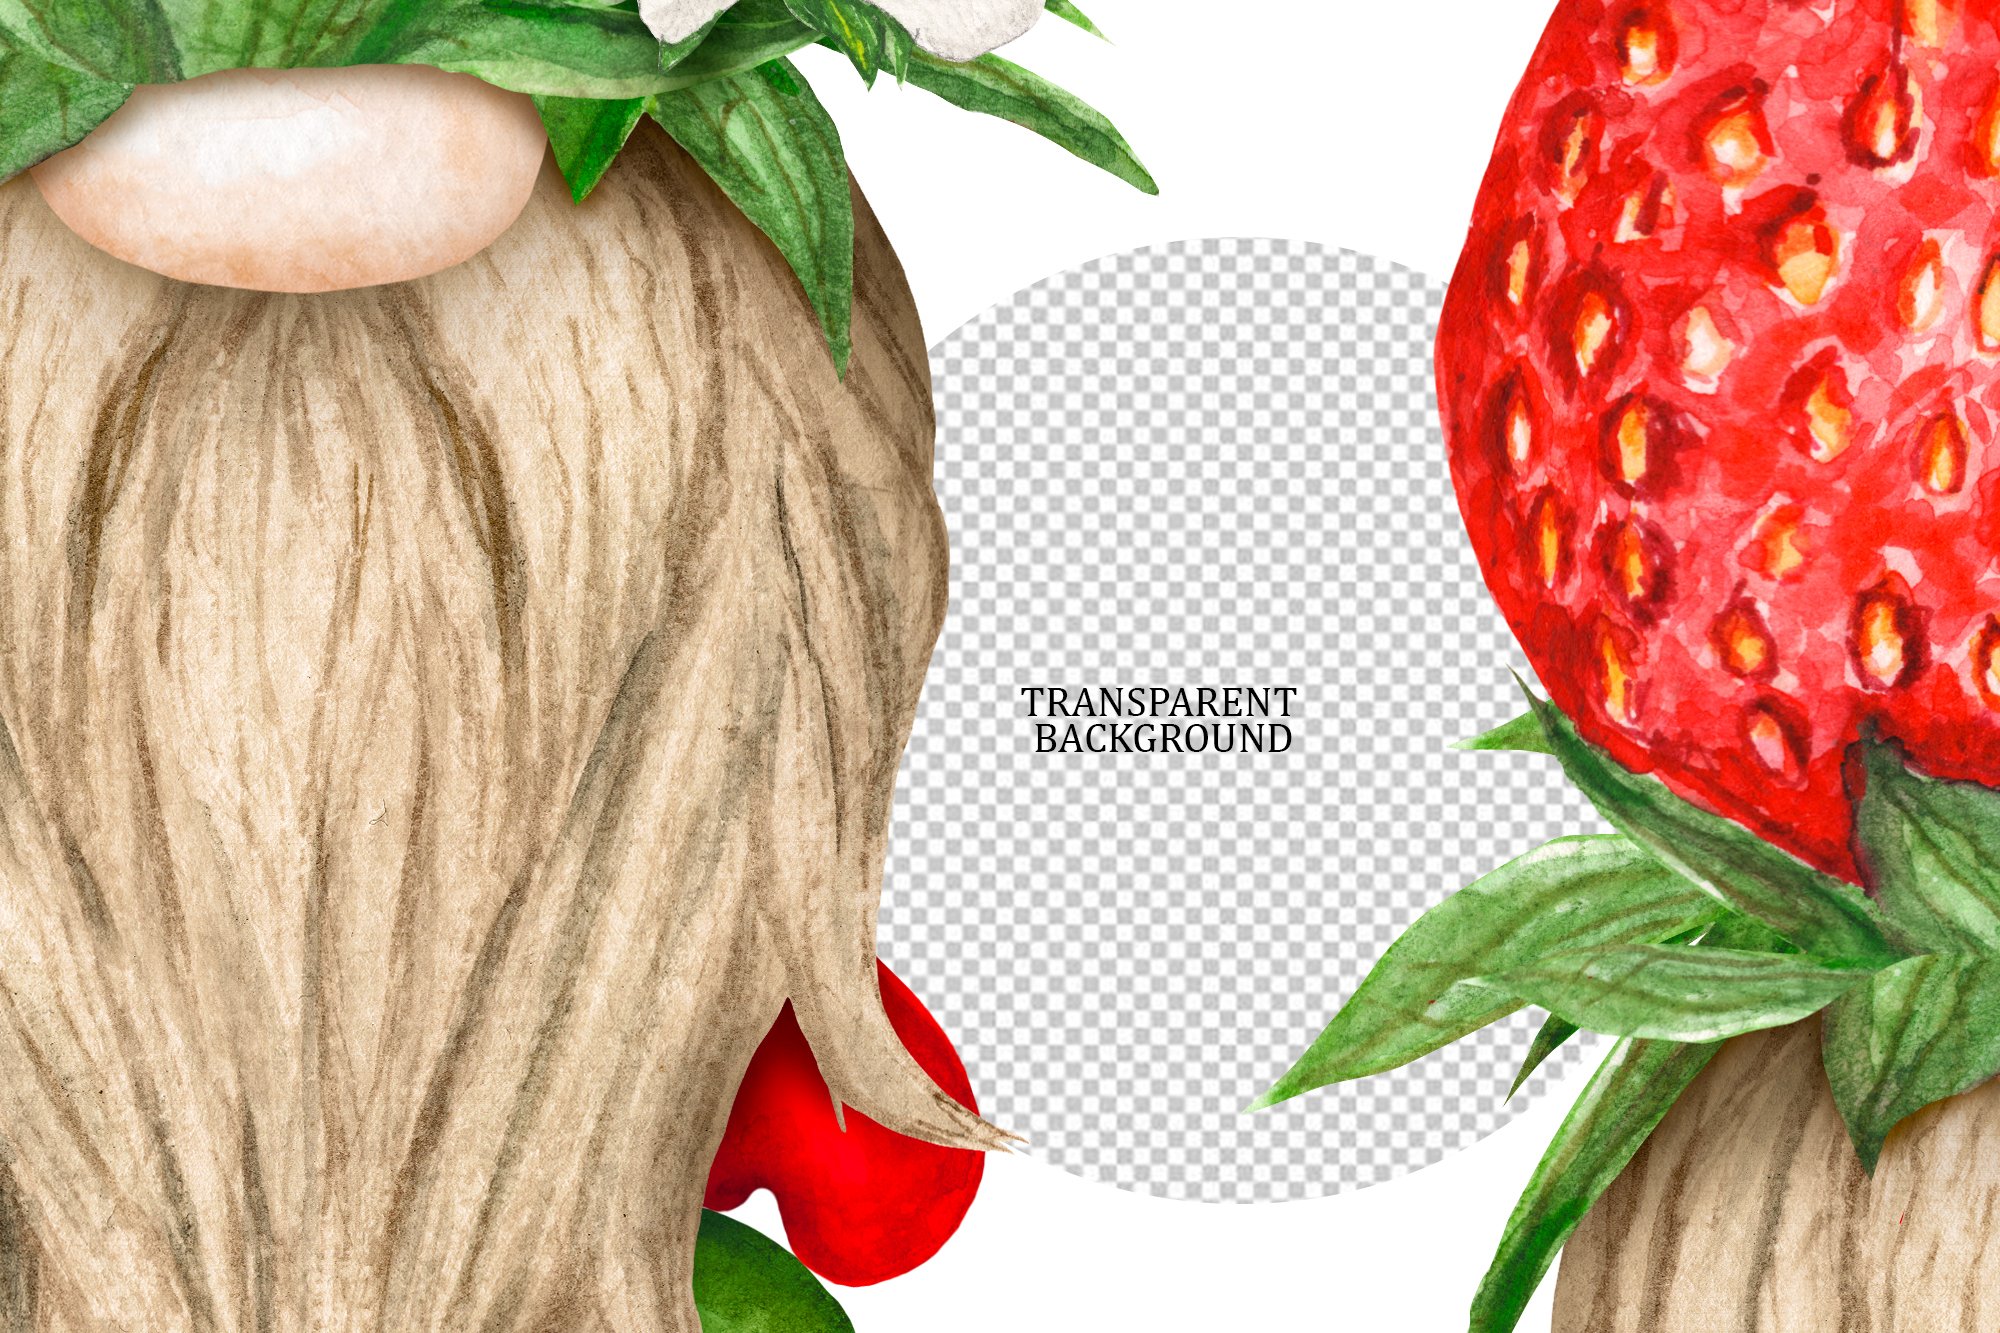 Gnome strawberry illustration on a transparent background.